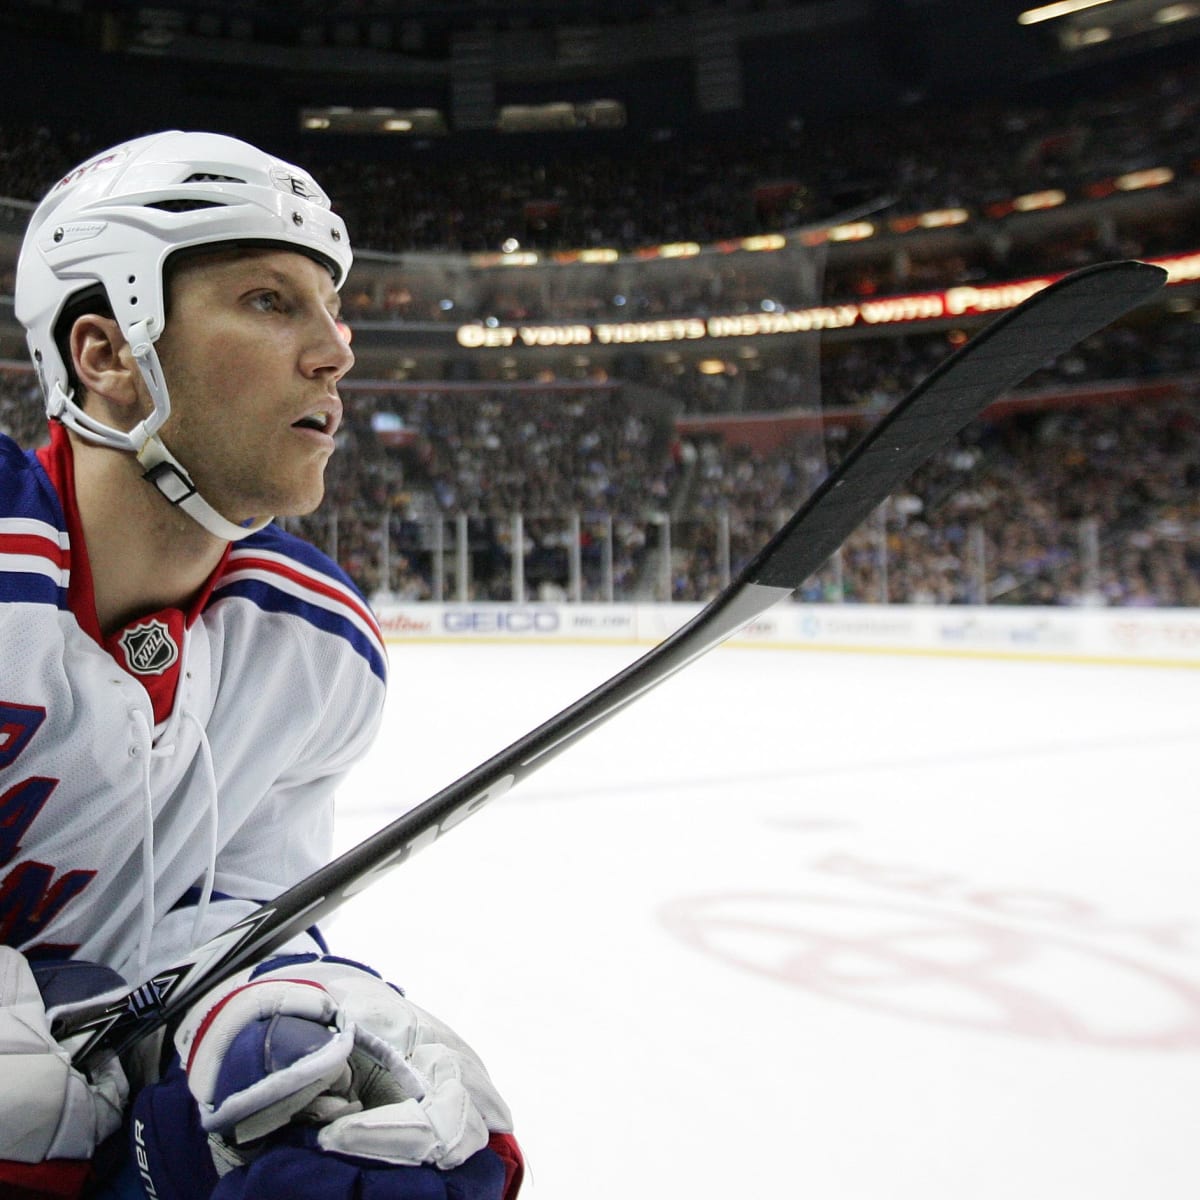 Sean Avery comes out of retirement to sign with ECHL's Solar Bears